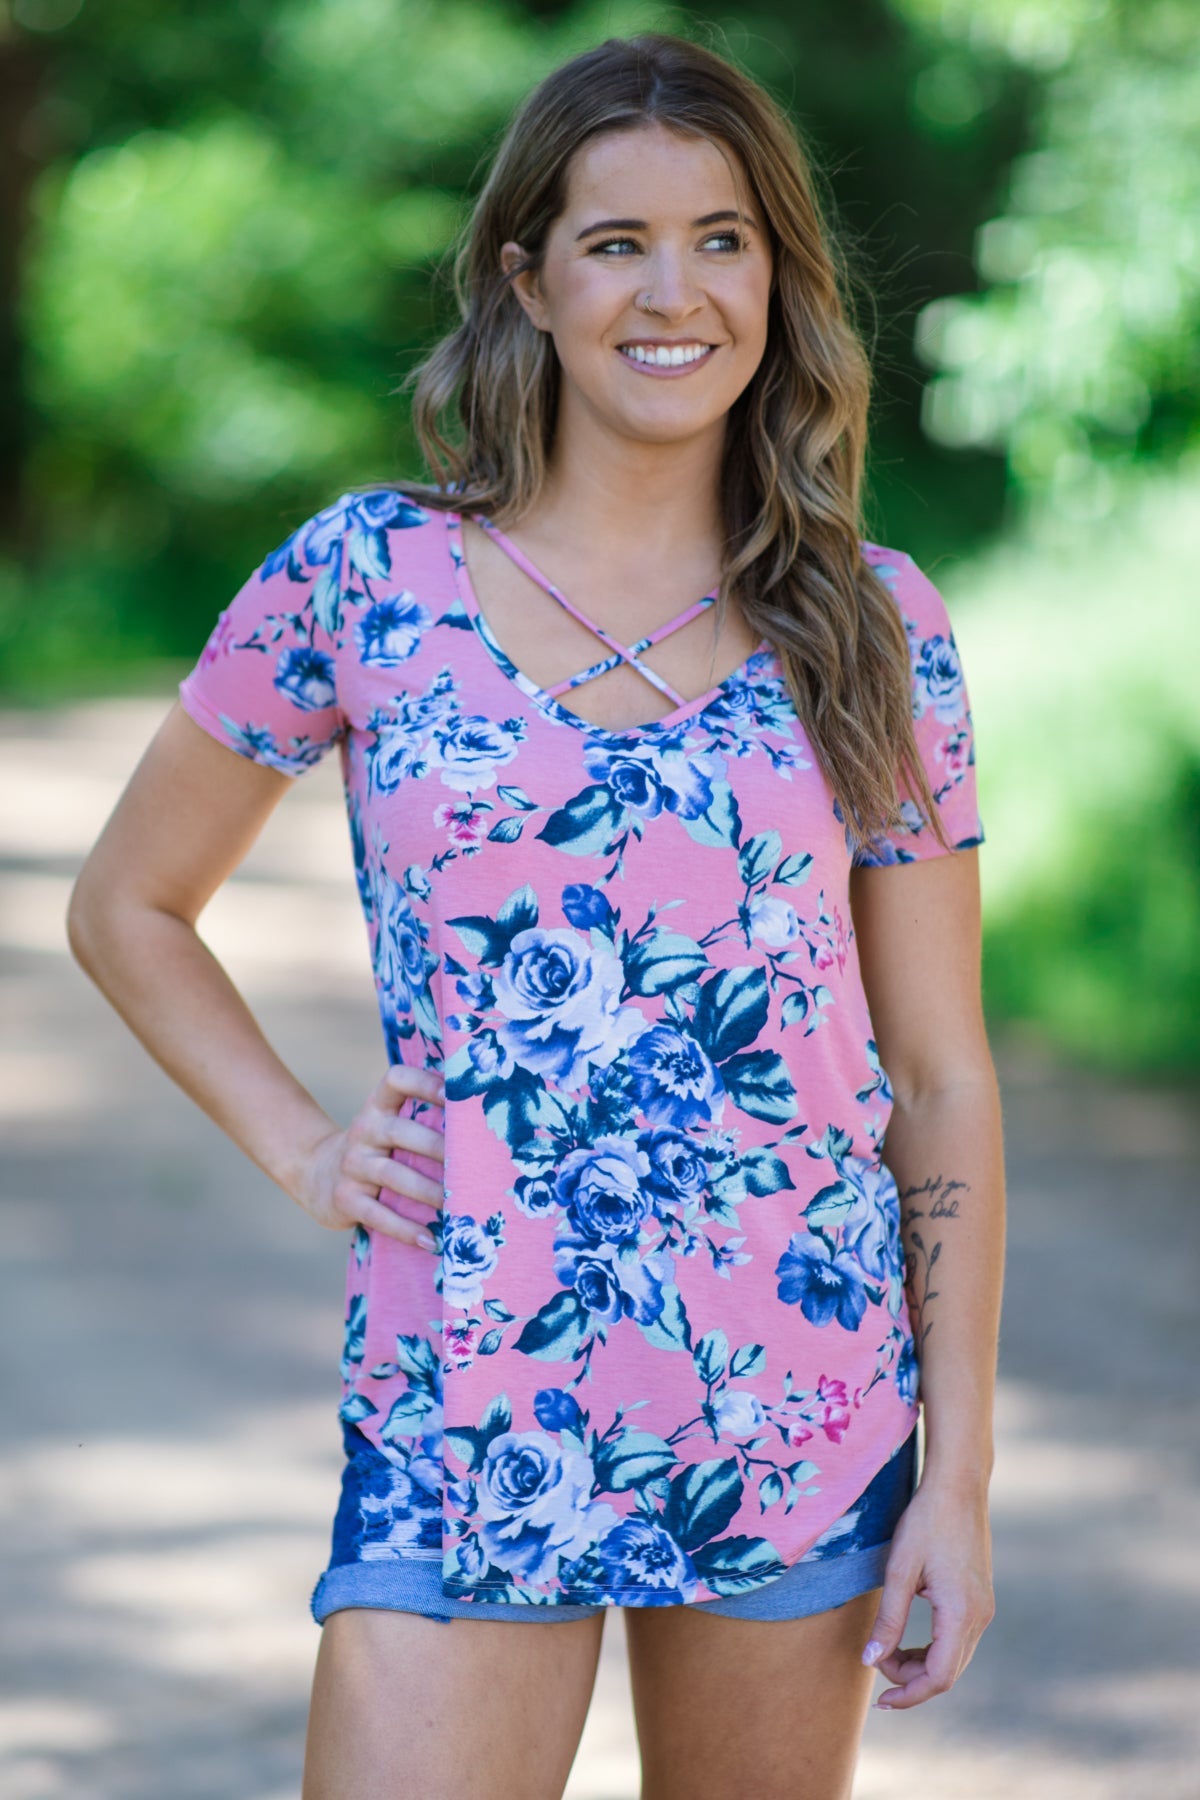 Blush Multicolor Floral Criss-Cross Floral Top - Filly Flair